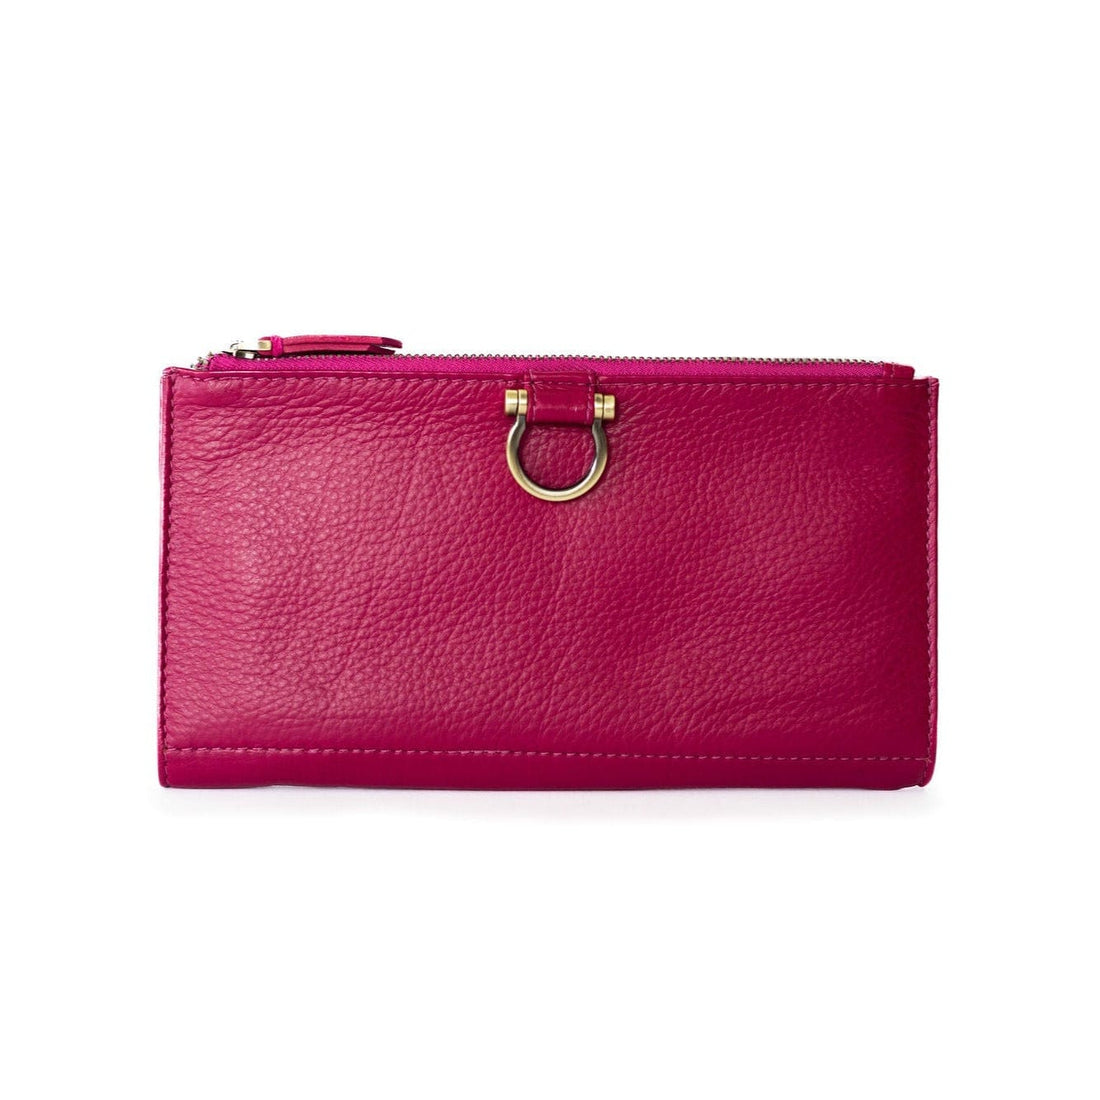 Sapahn | Ethical Leather Handbags and Accessories